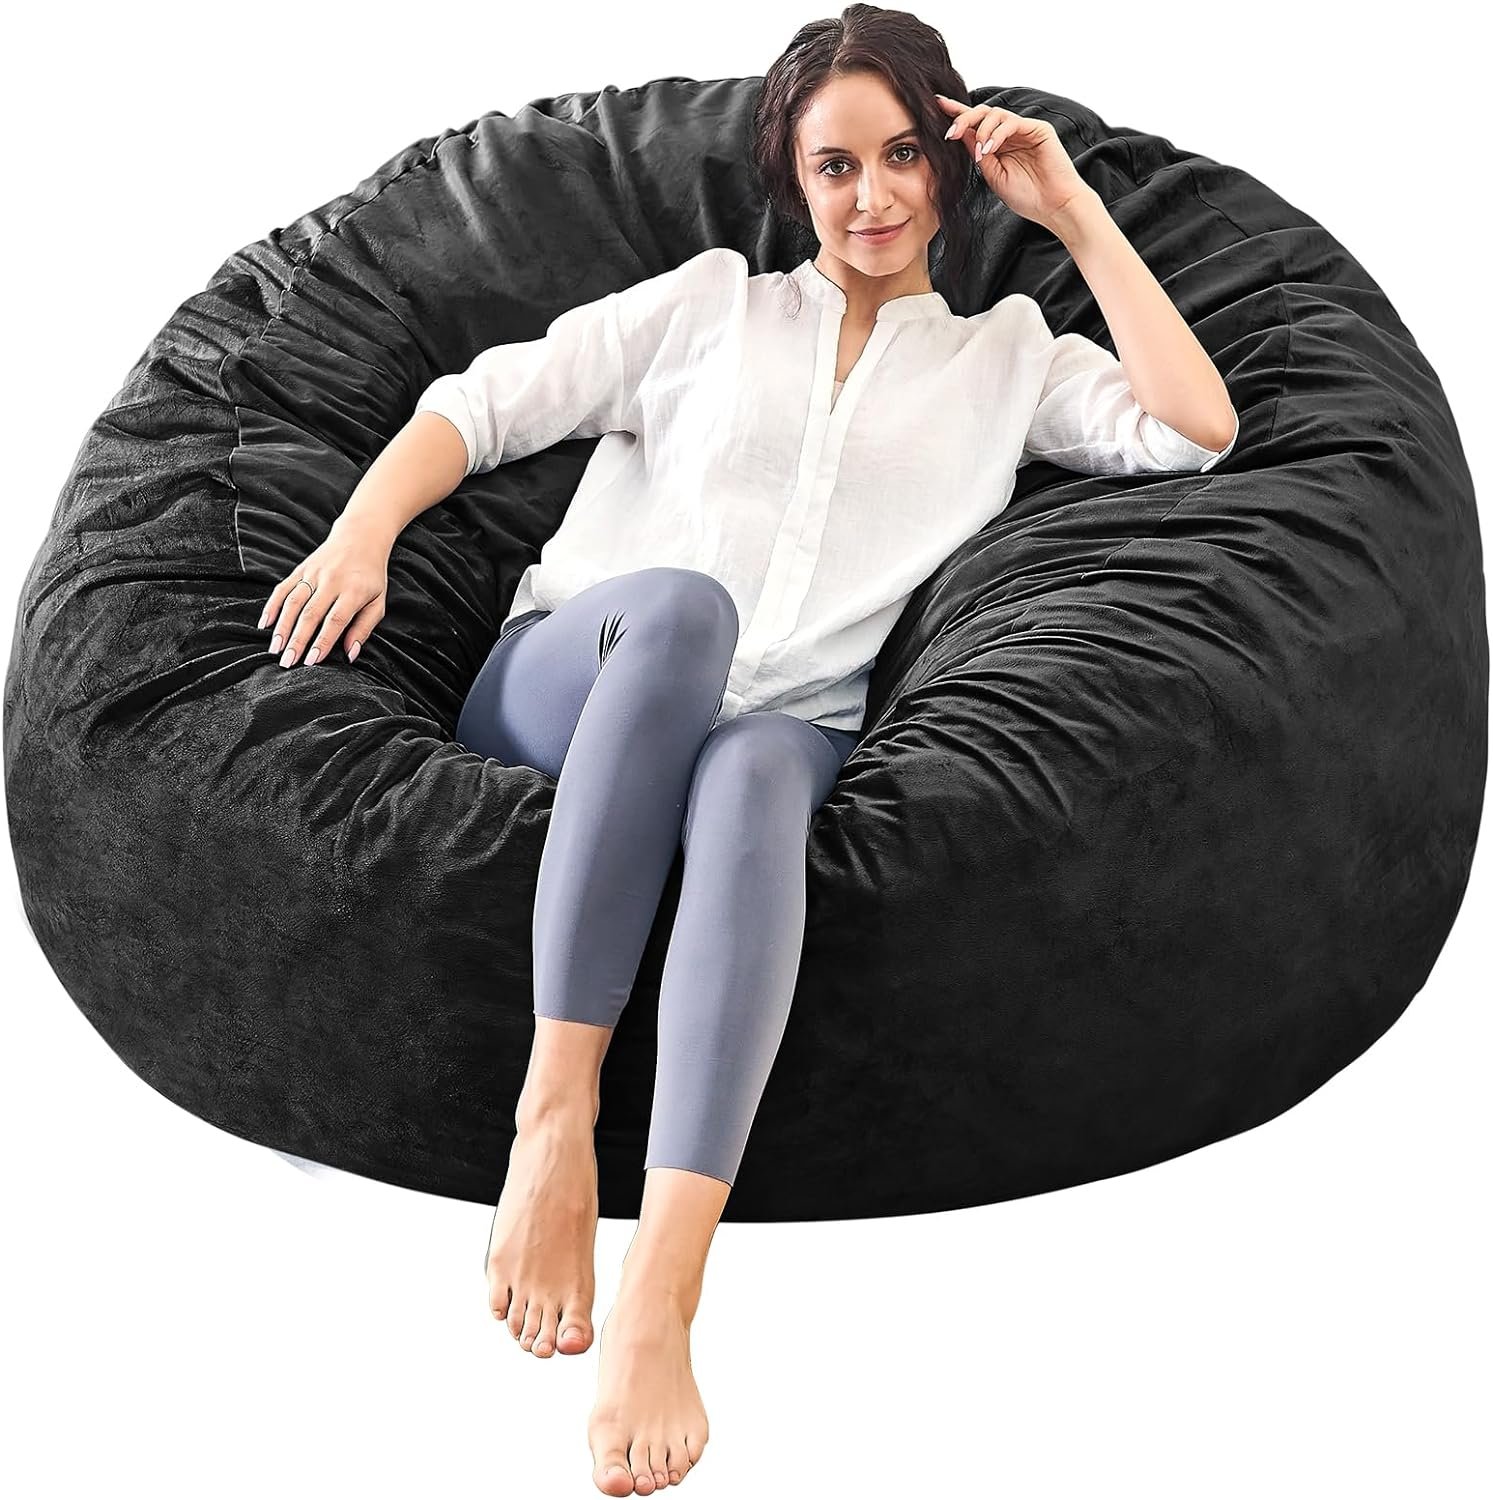 Bean Bag Chairs for Adults Review